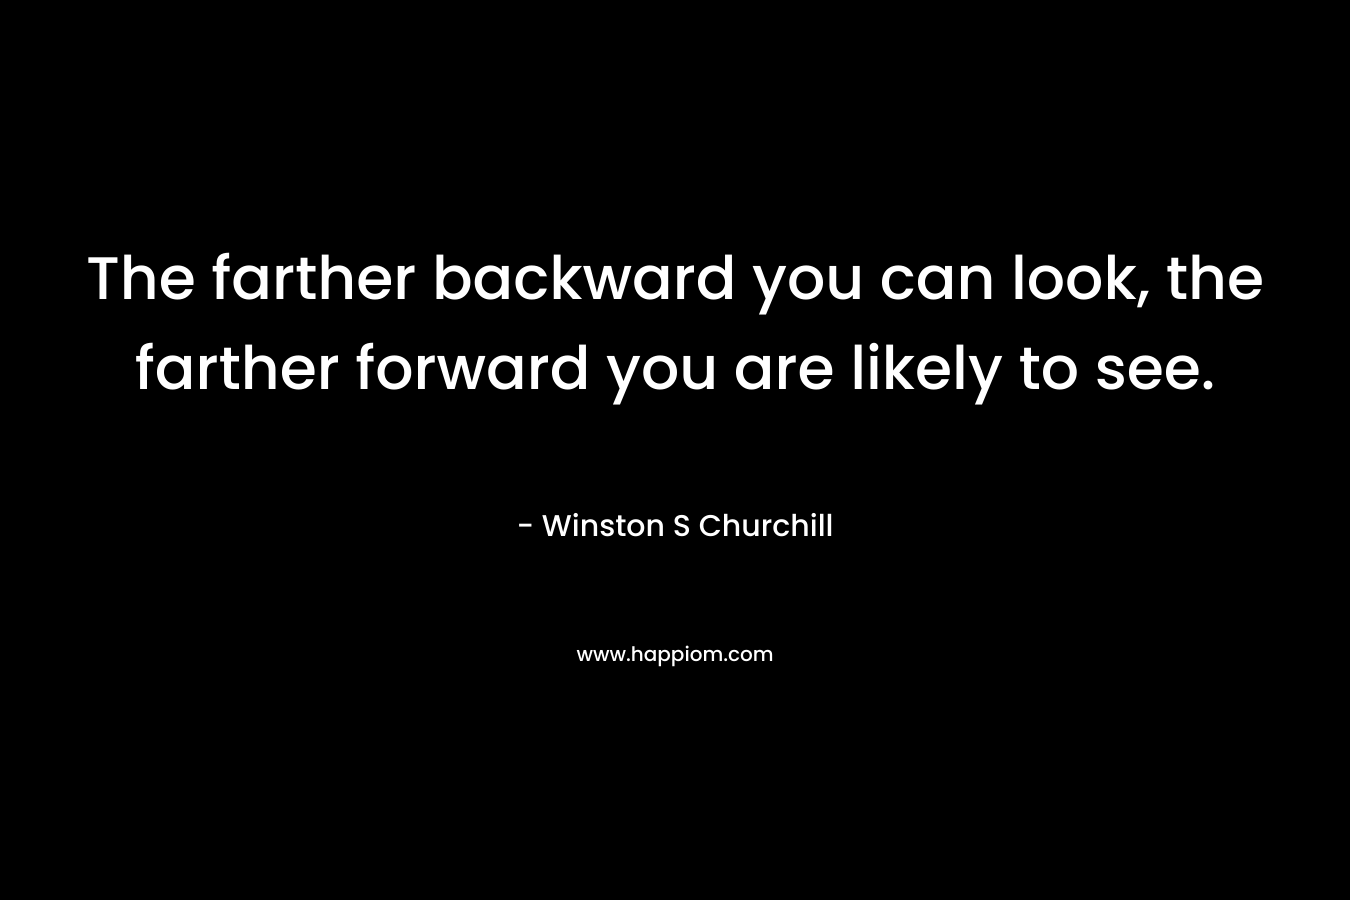 The farther backward you can look, the farther forward you are likely to see.